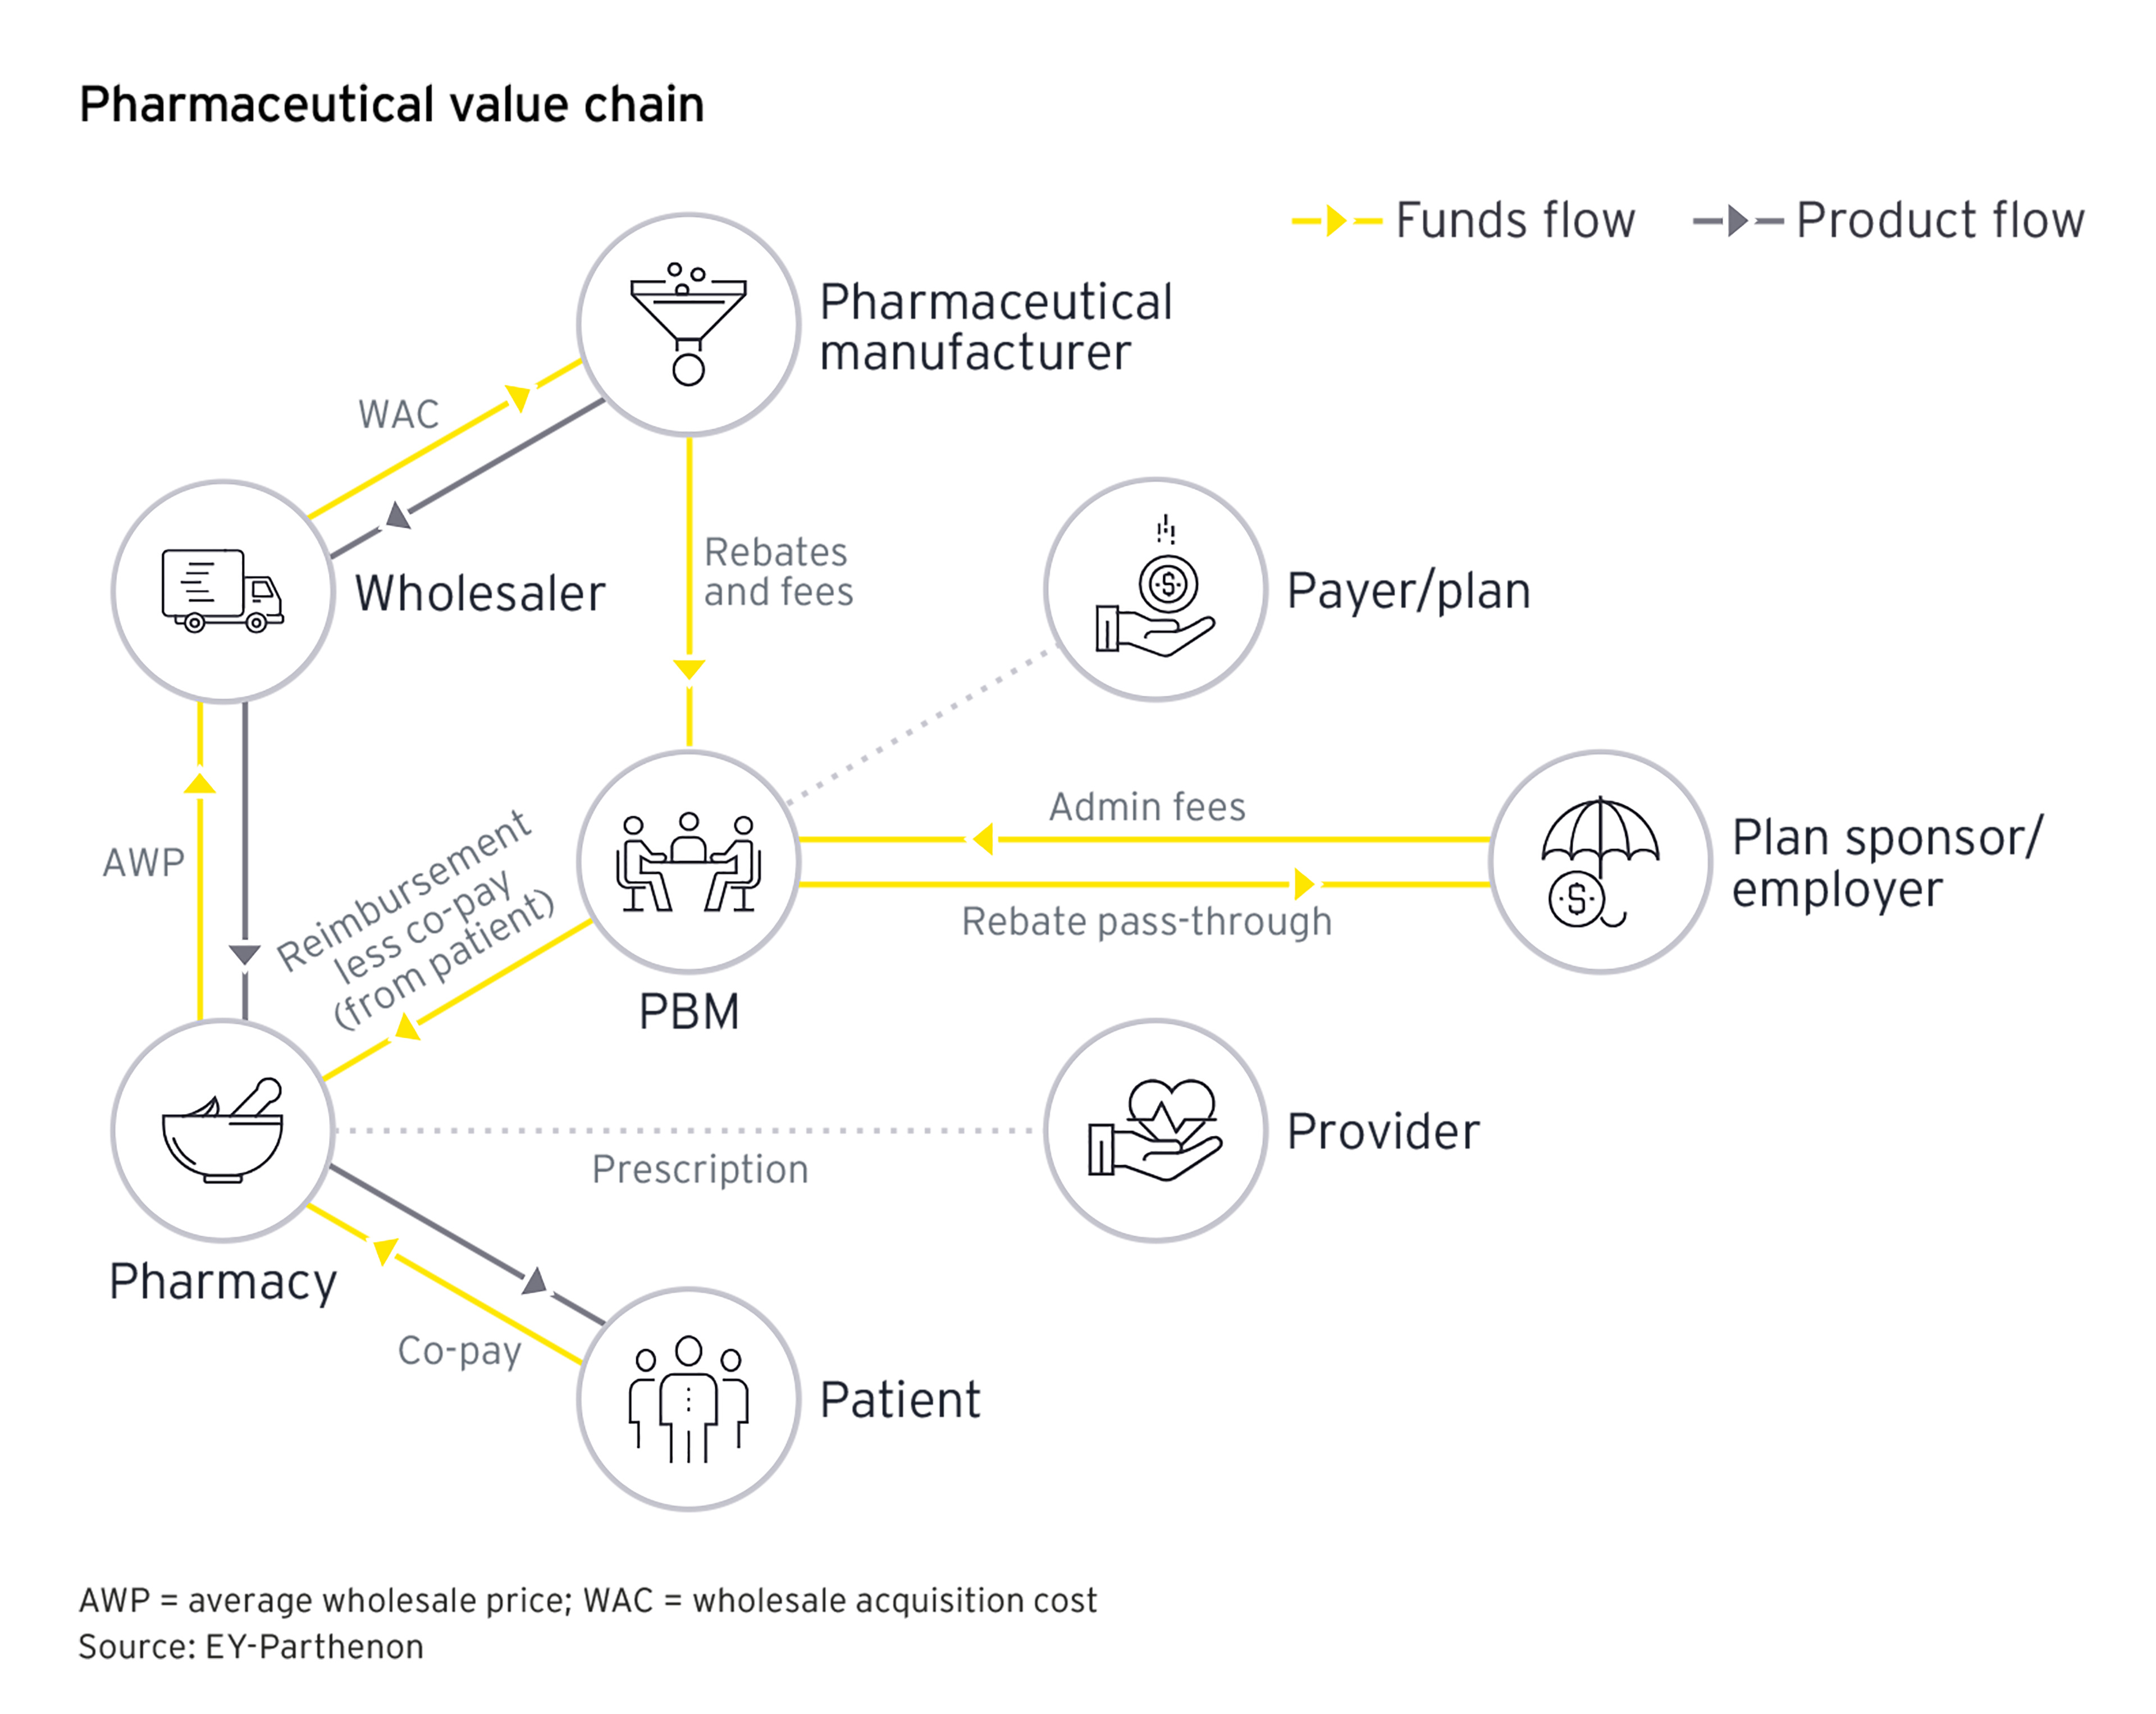 ey-pharmaceutical-value-chain